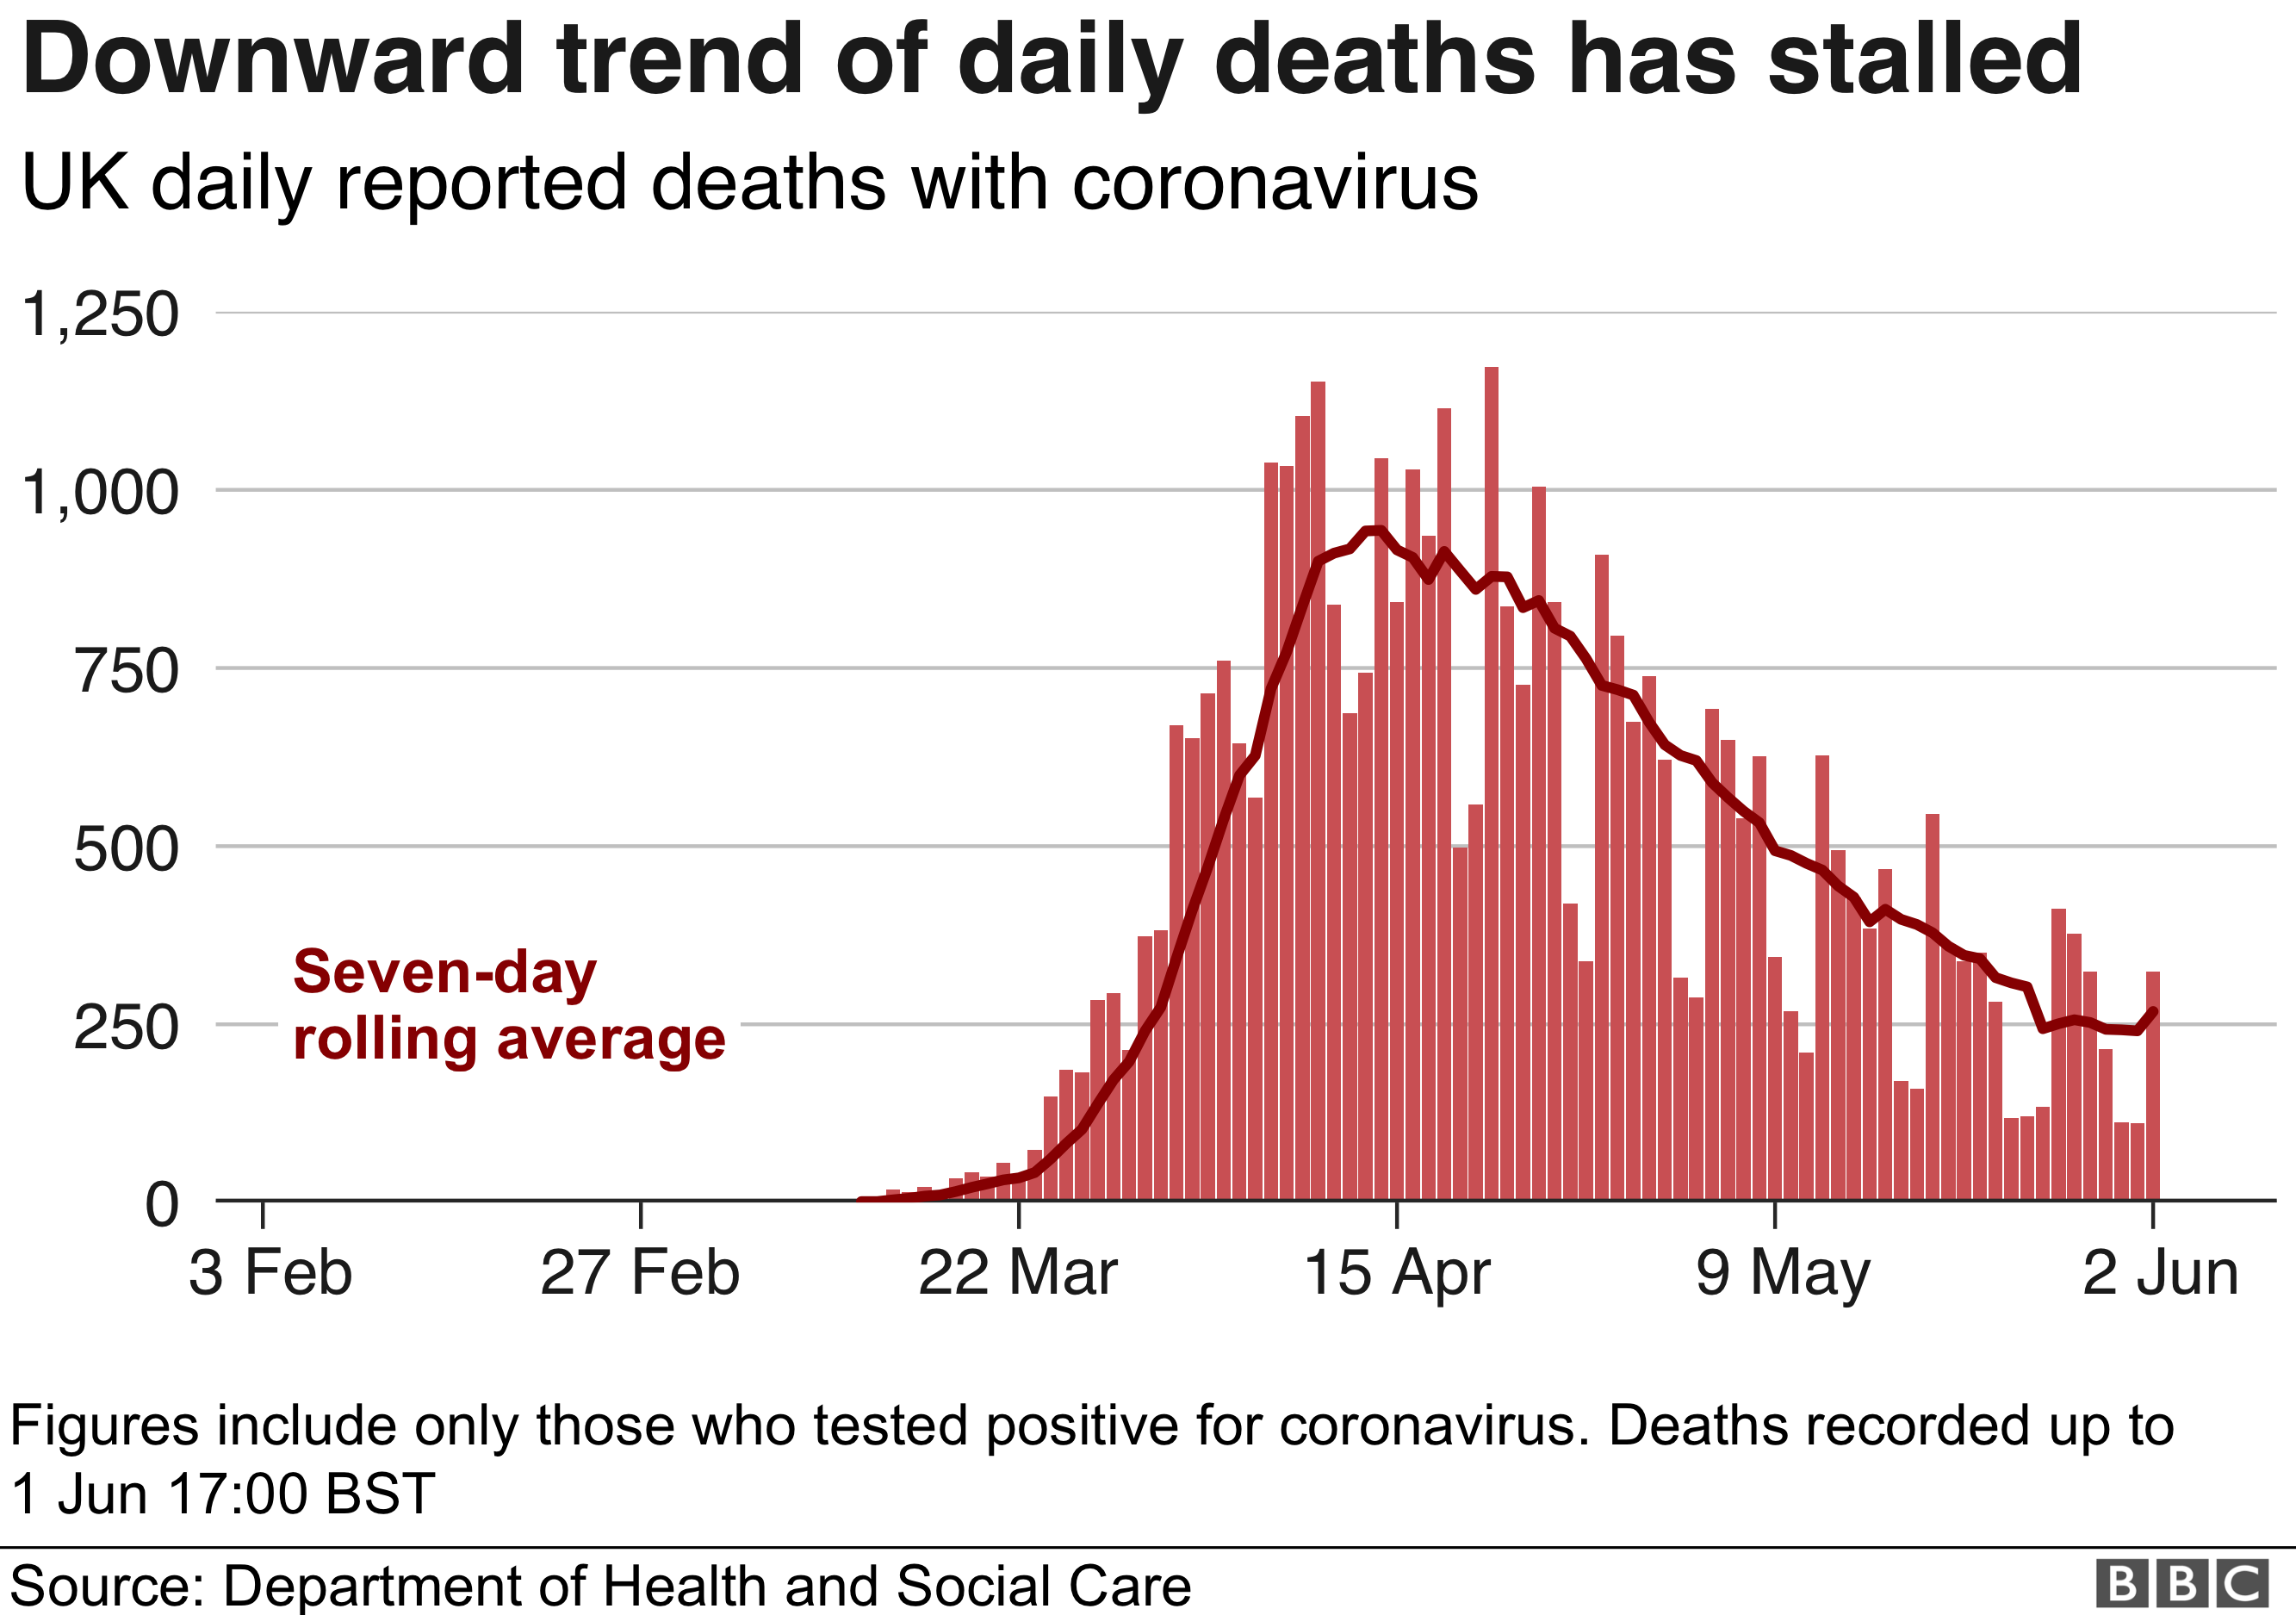 Downward trend in daily deaths appears to have stalled